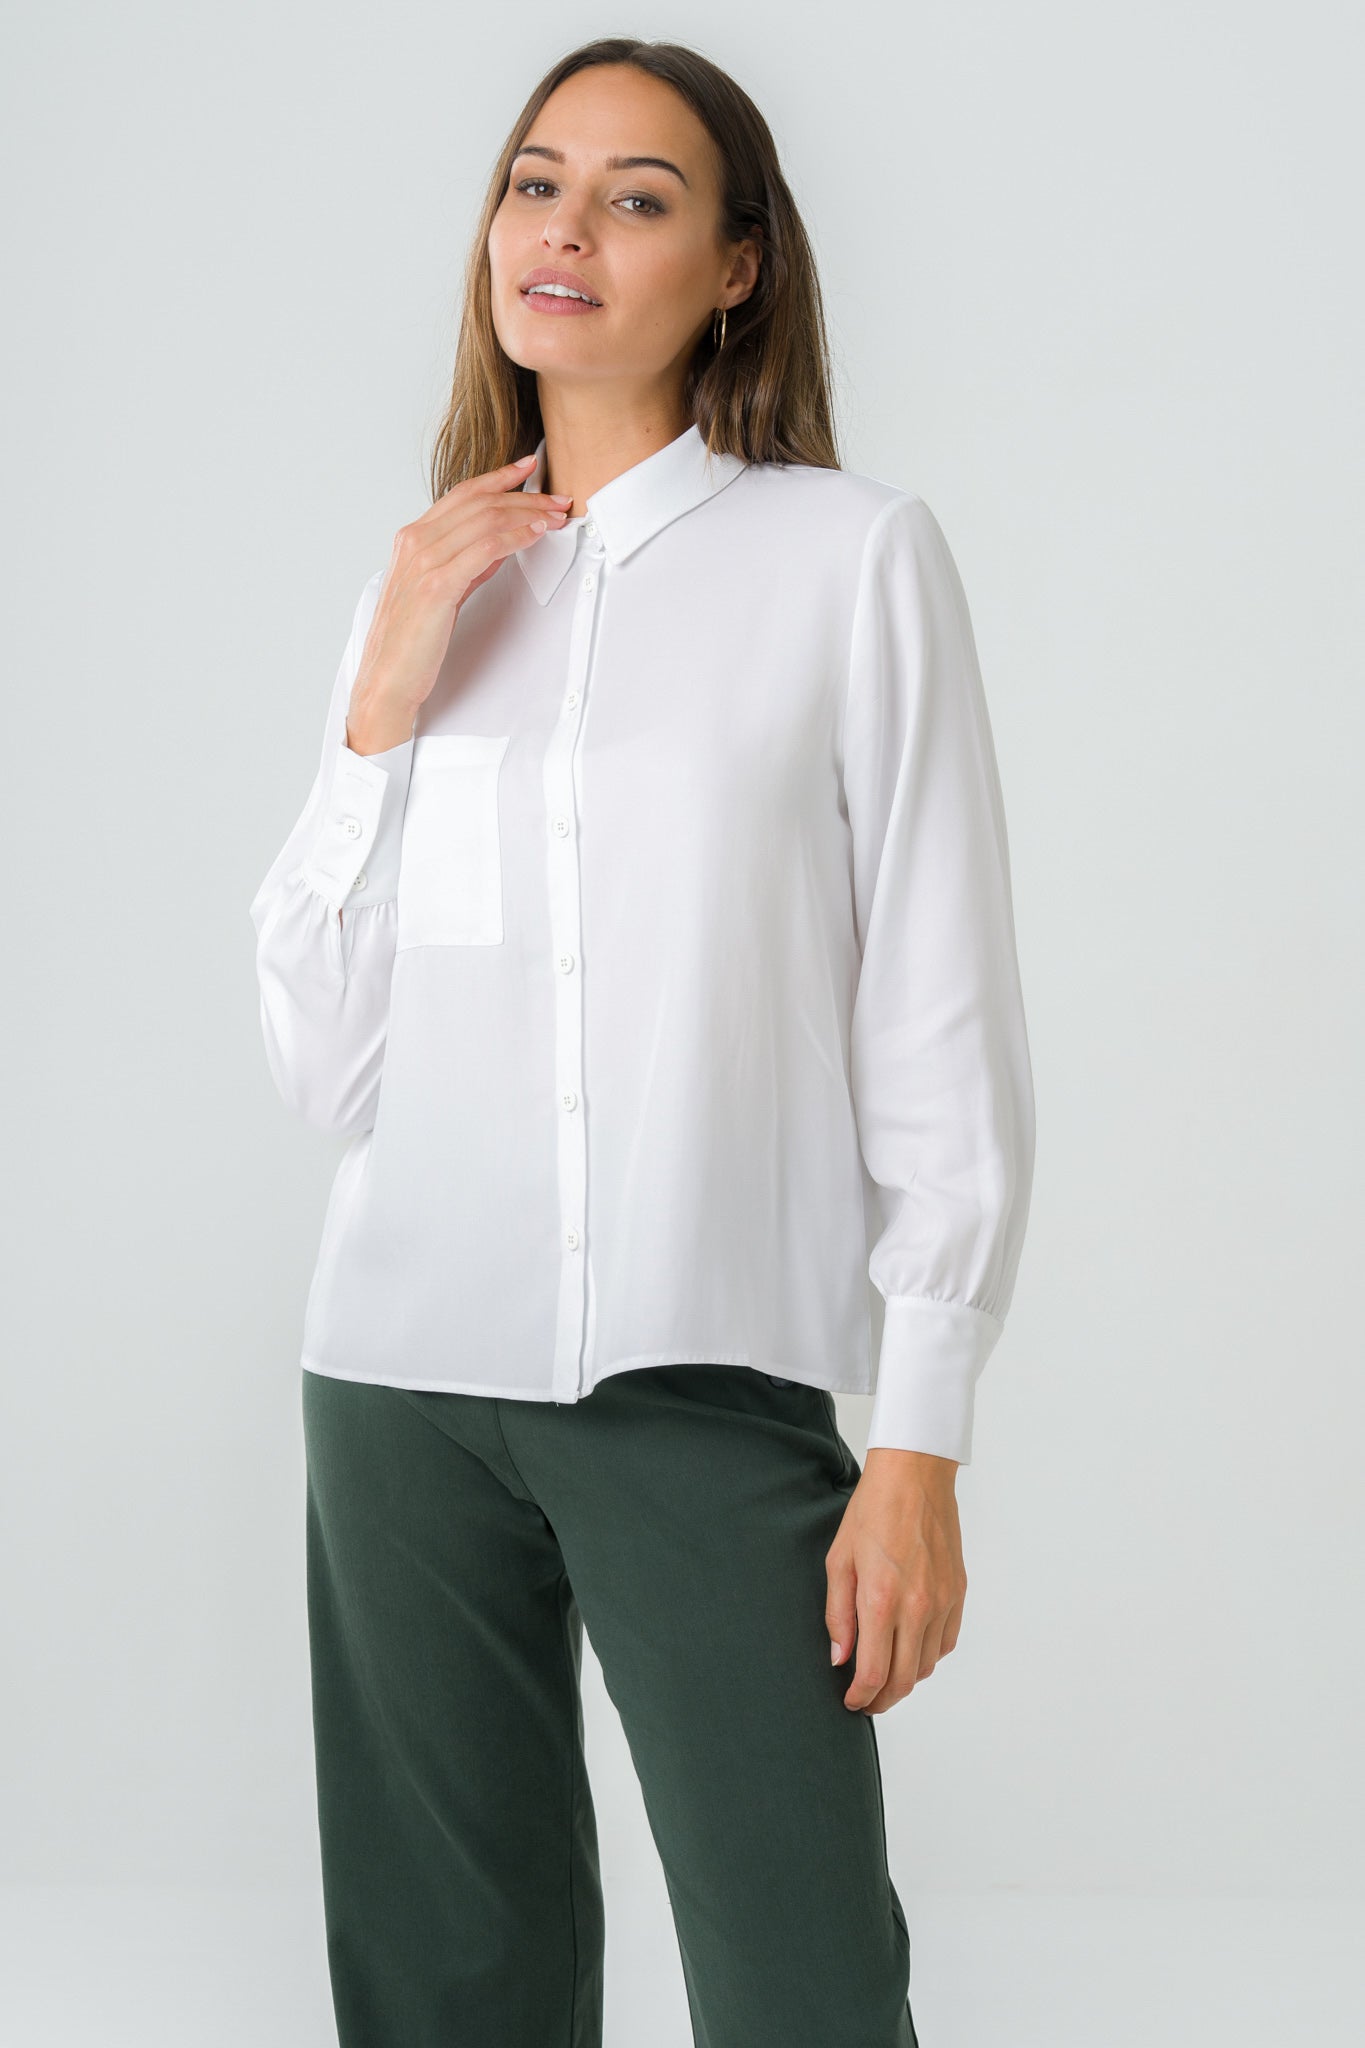 White blouse Kauri made of 100% Tencel by Avani